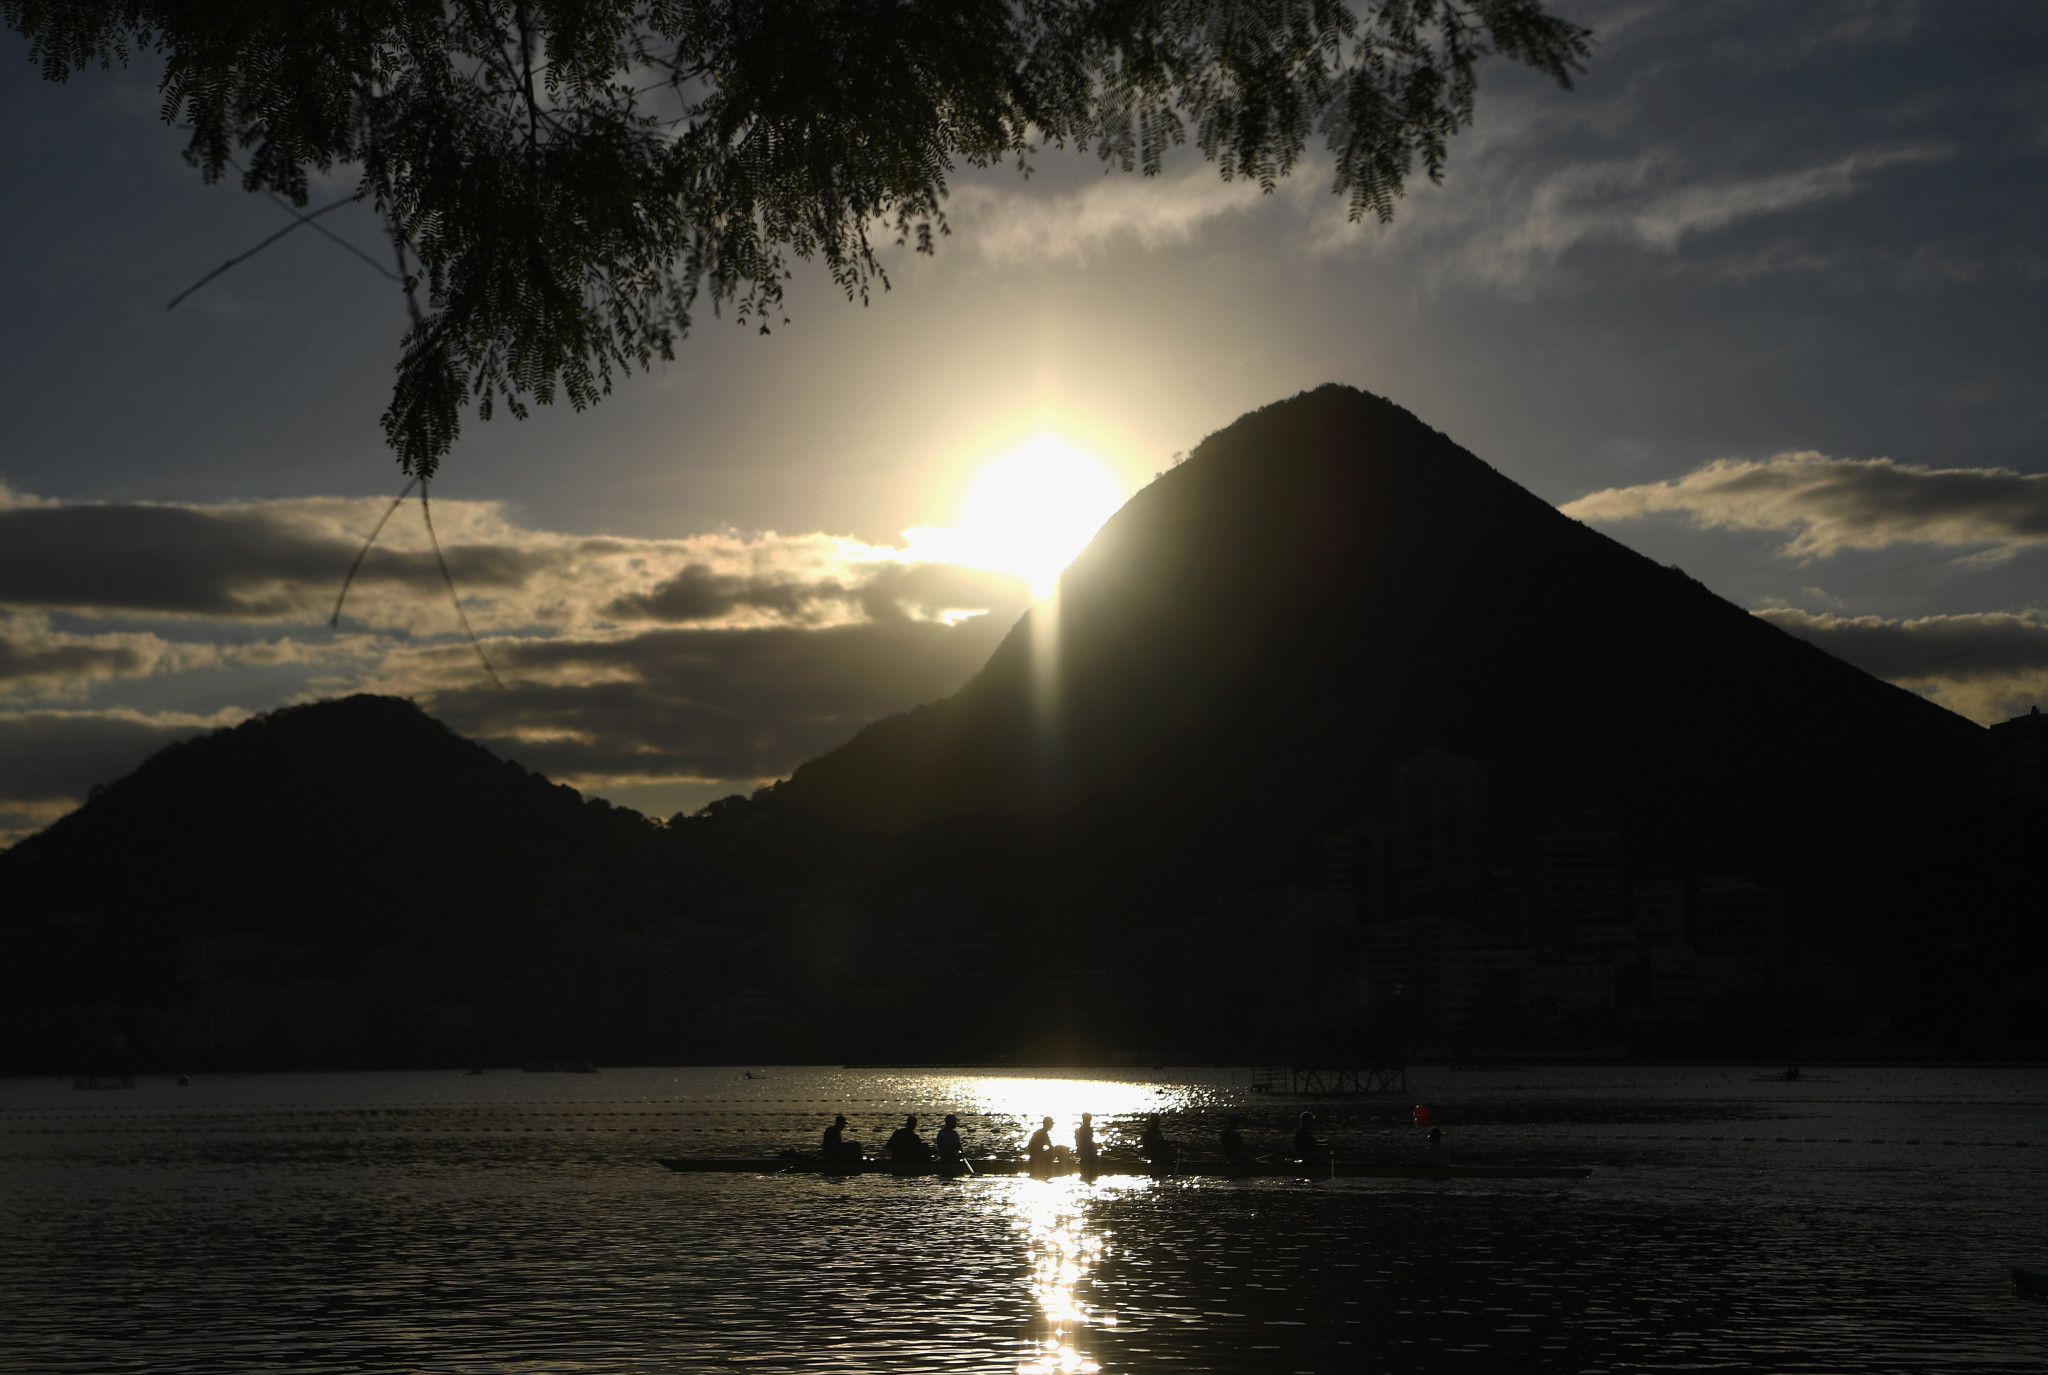 The qualification event in Rio de Janeiro has been postponed once more ©Getty Images